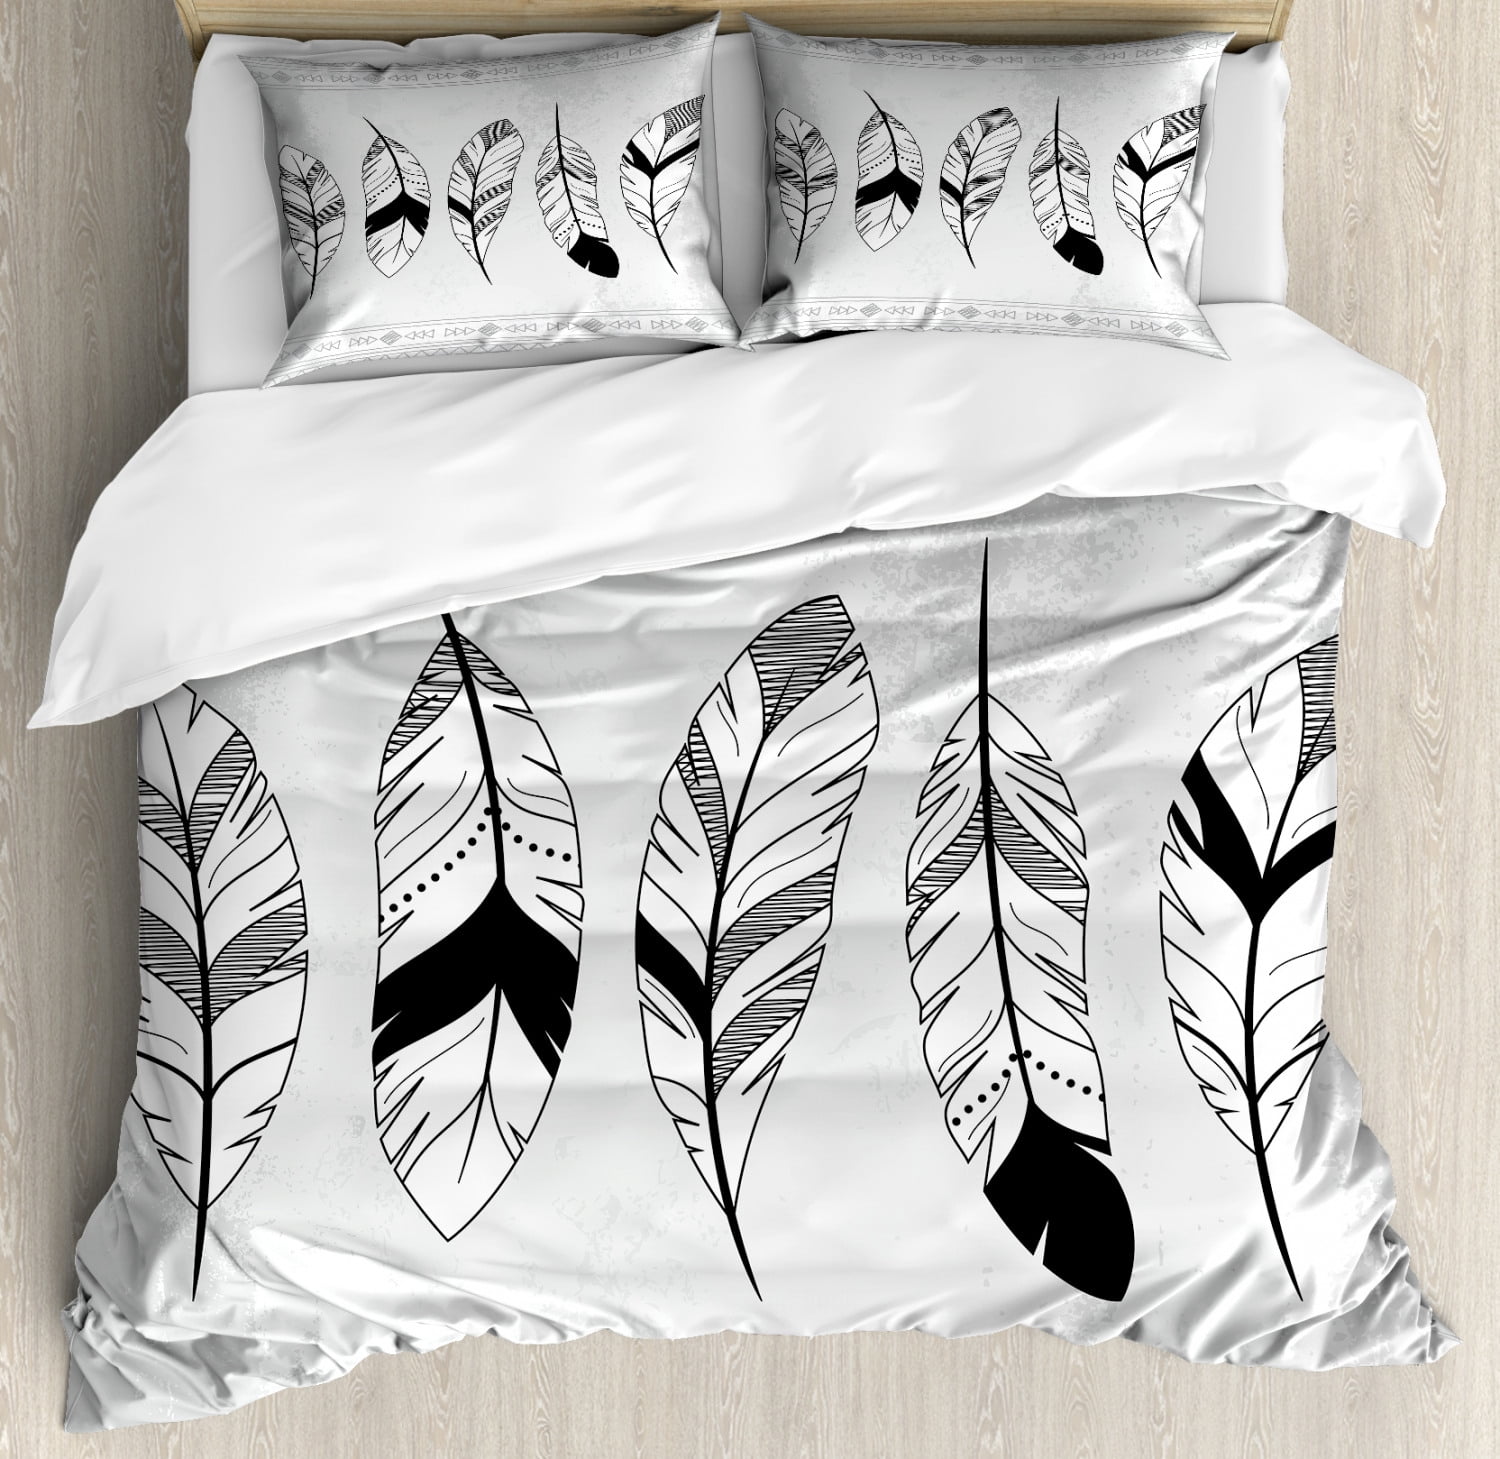 Feather King Size Duvet Cover Set Stylized Doodle Borders With